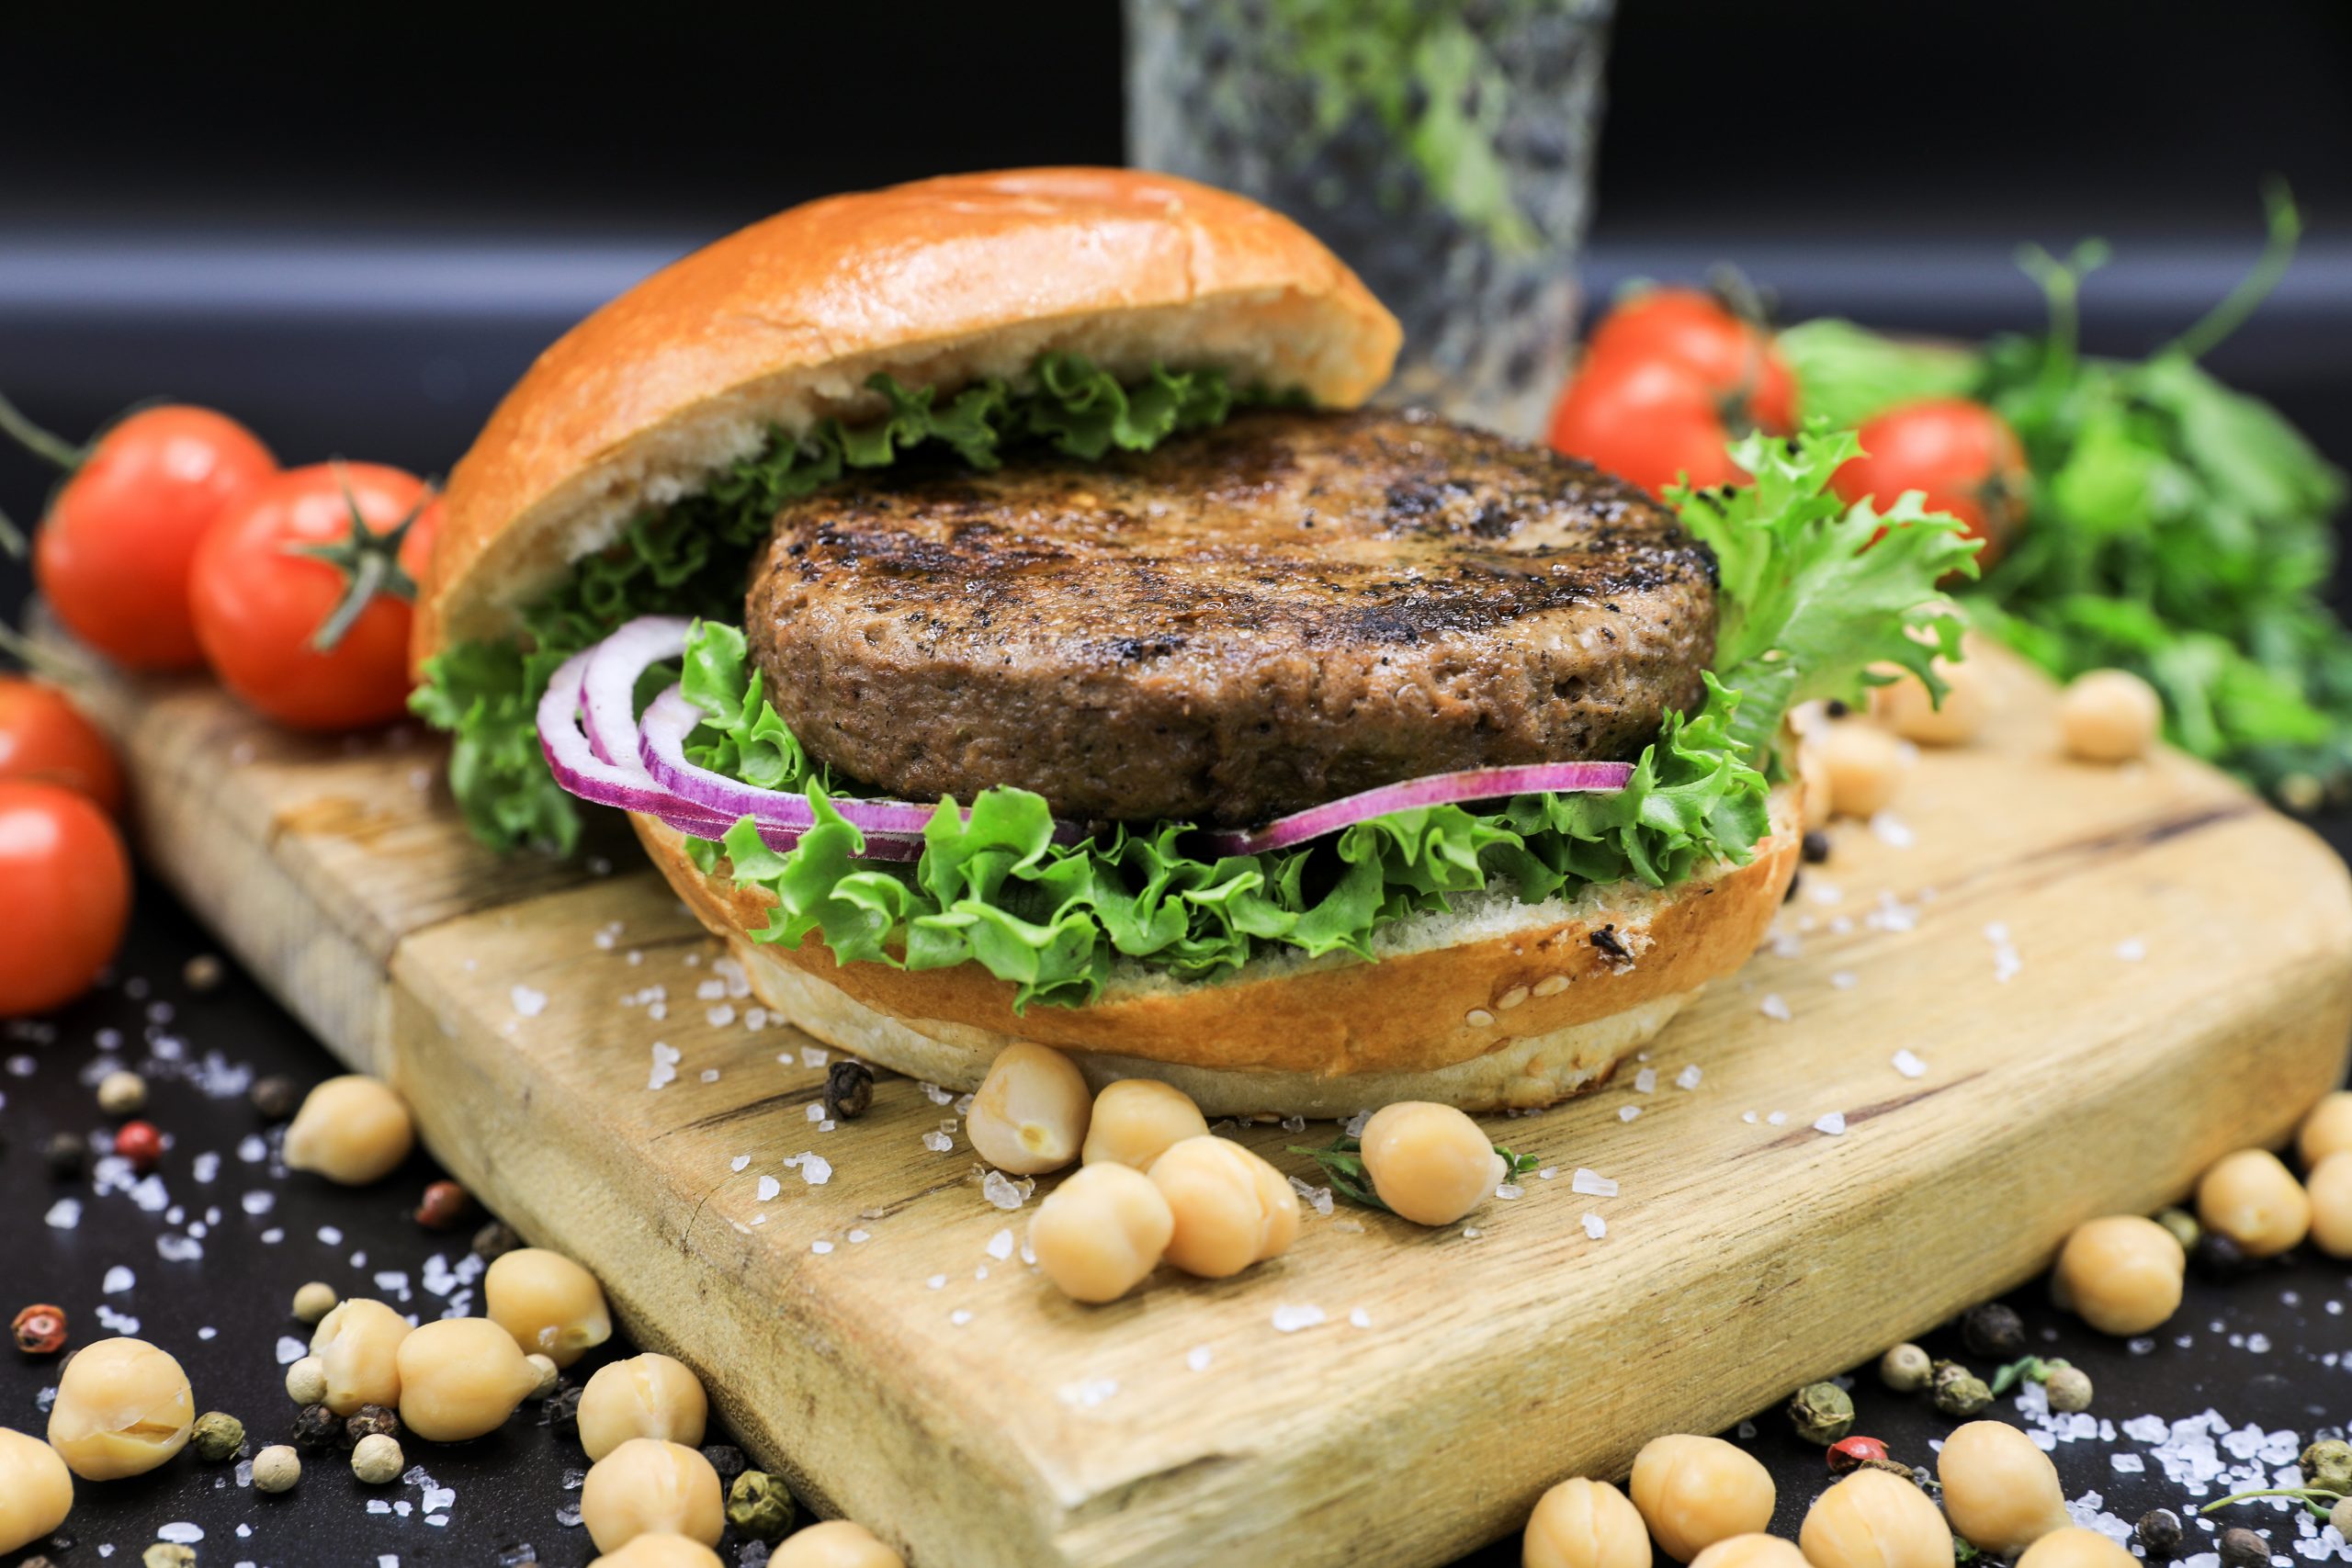 Meat.The End introduces the world’s first texturized chickpea protein burger